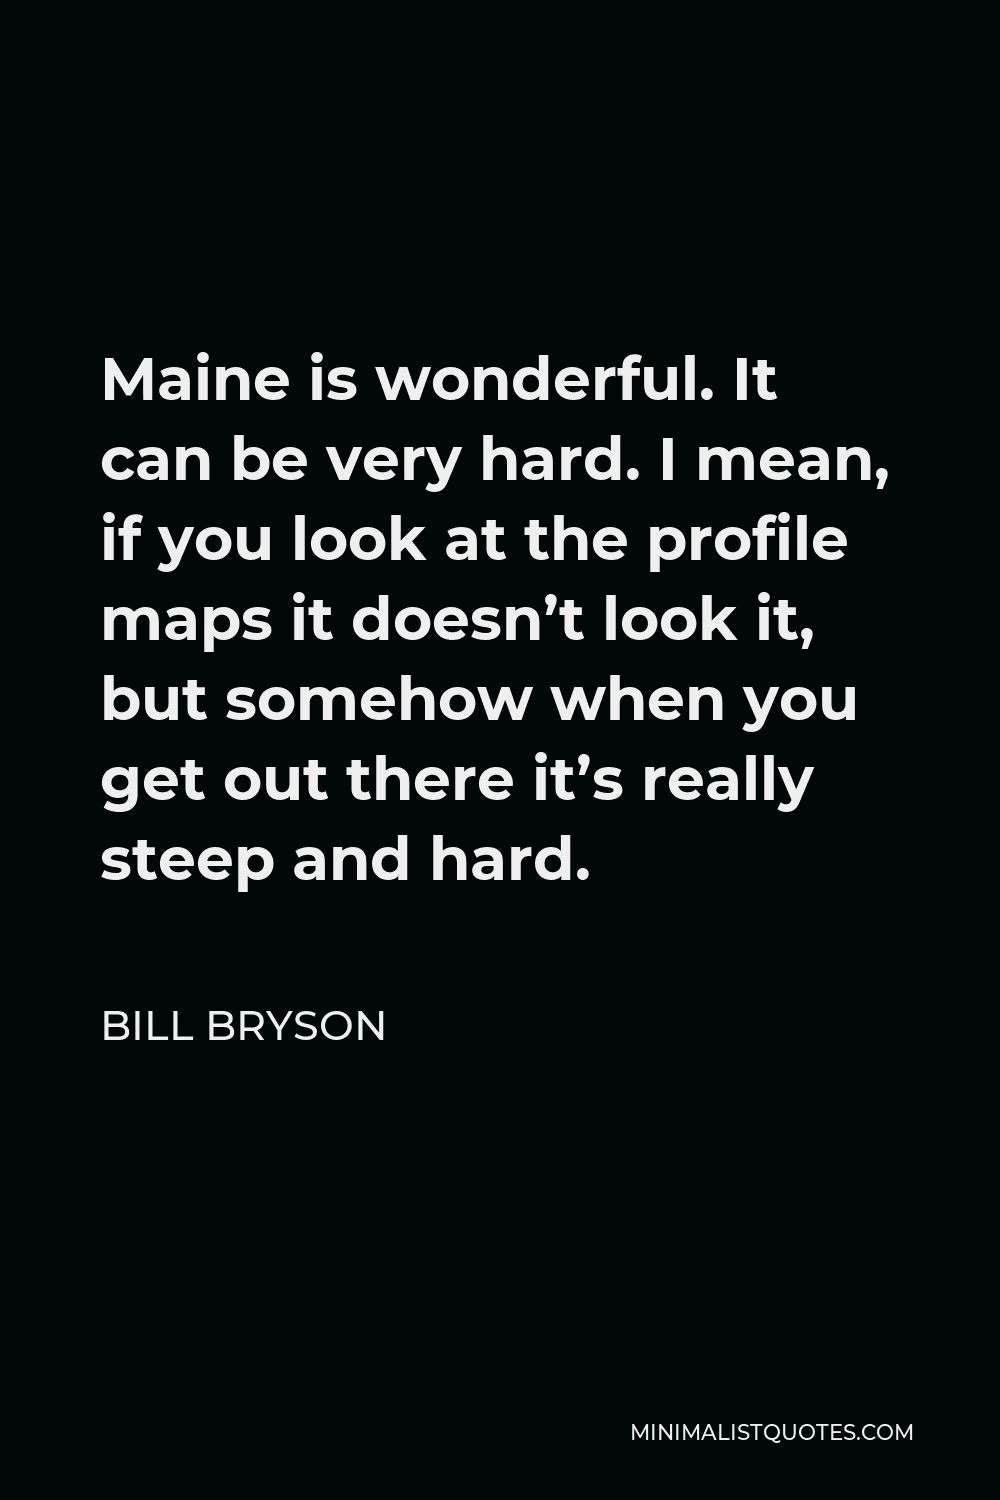 Bill Bryson Quote - Maine is wonderful. It can be very hard. I mean, if you look at the profile maps it doesn’t look it, but somehow when you get out there it’s really steep and hard.